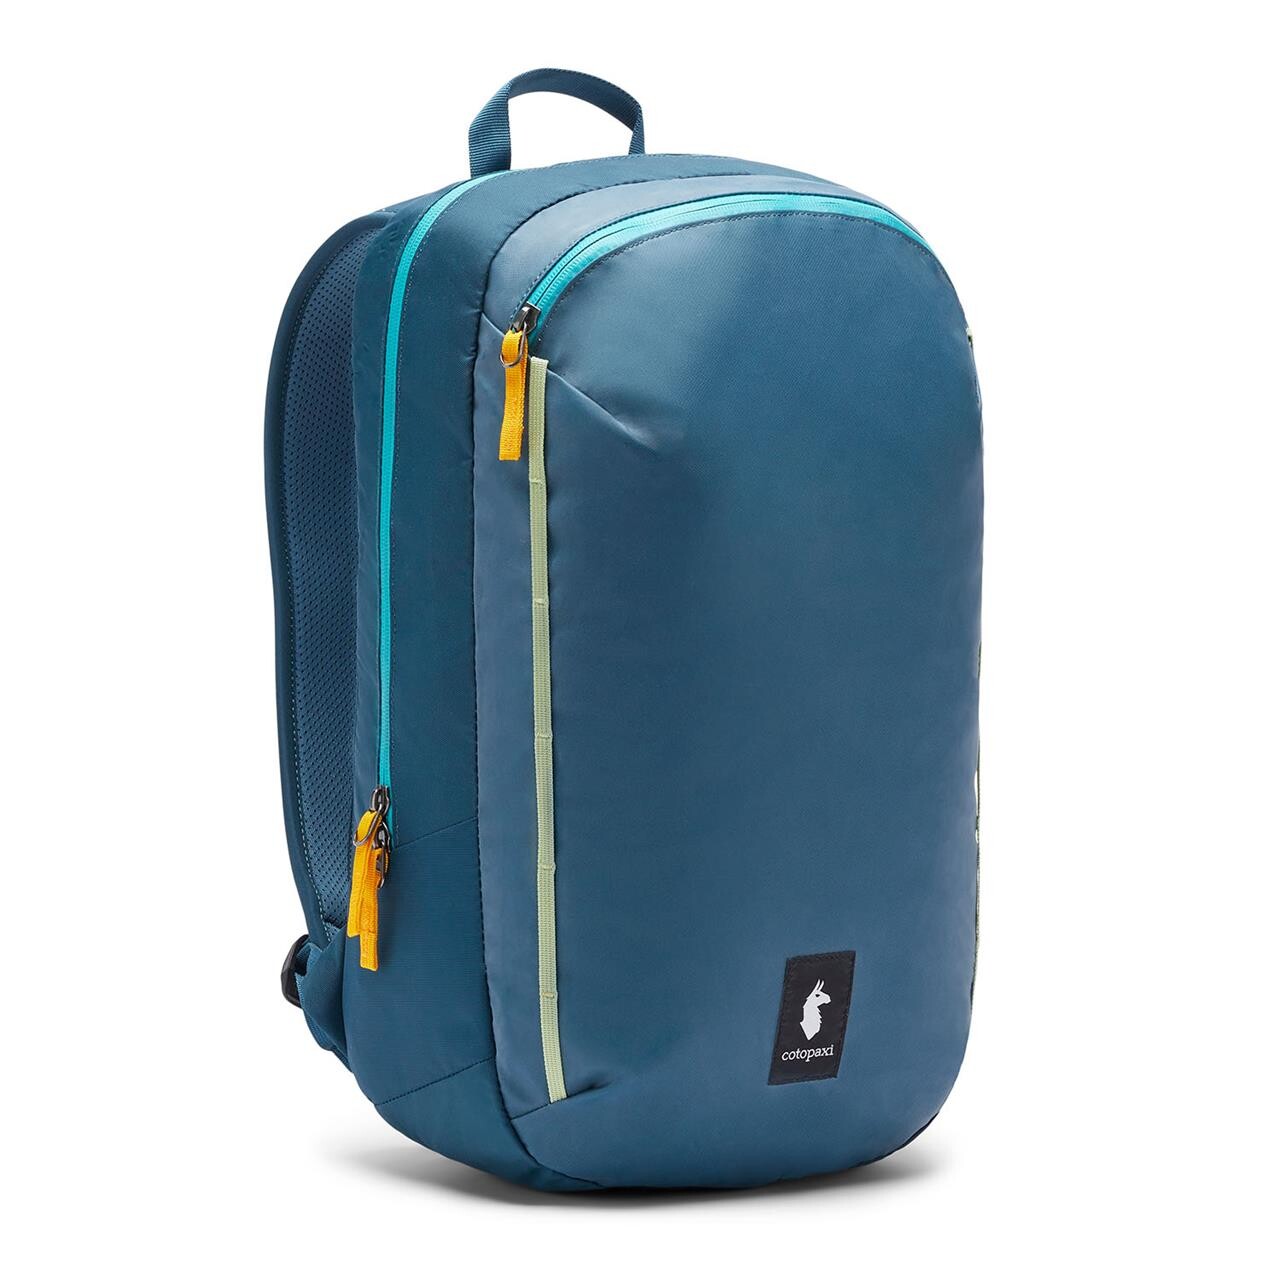 Cotopaxi Vaya 18l Backpack - Cada Dia (Blå (ABYSS) ONE SIZE)